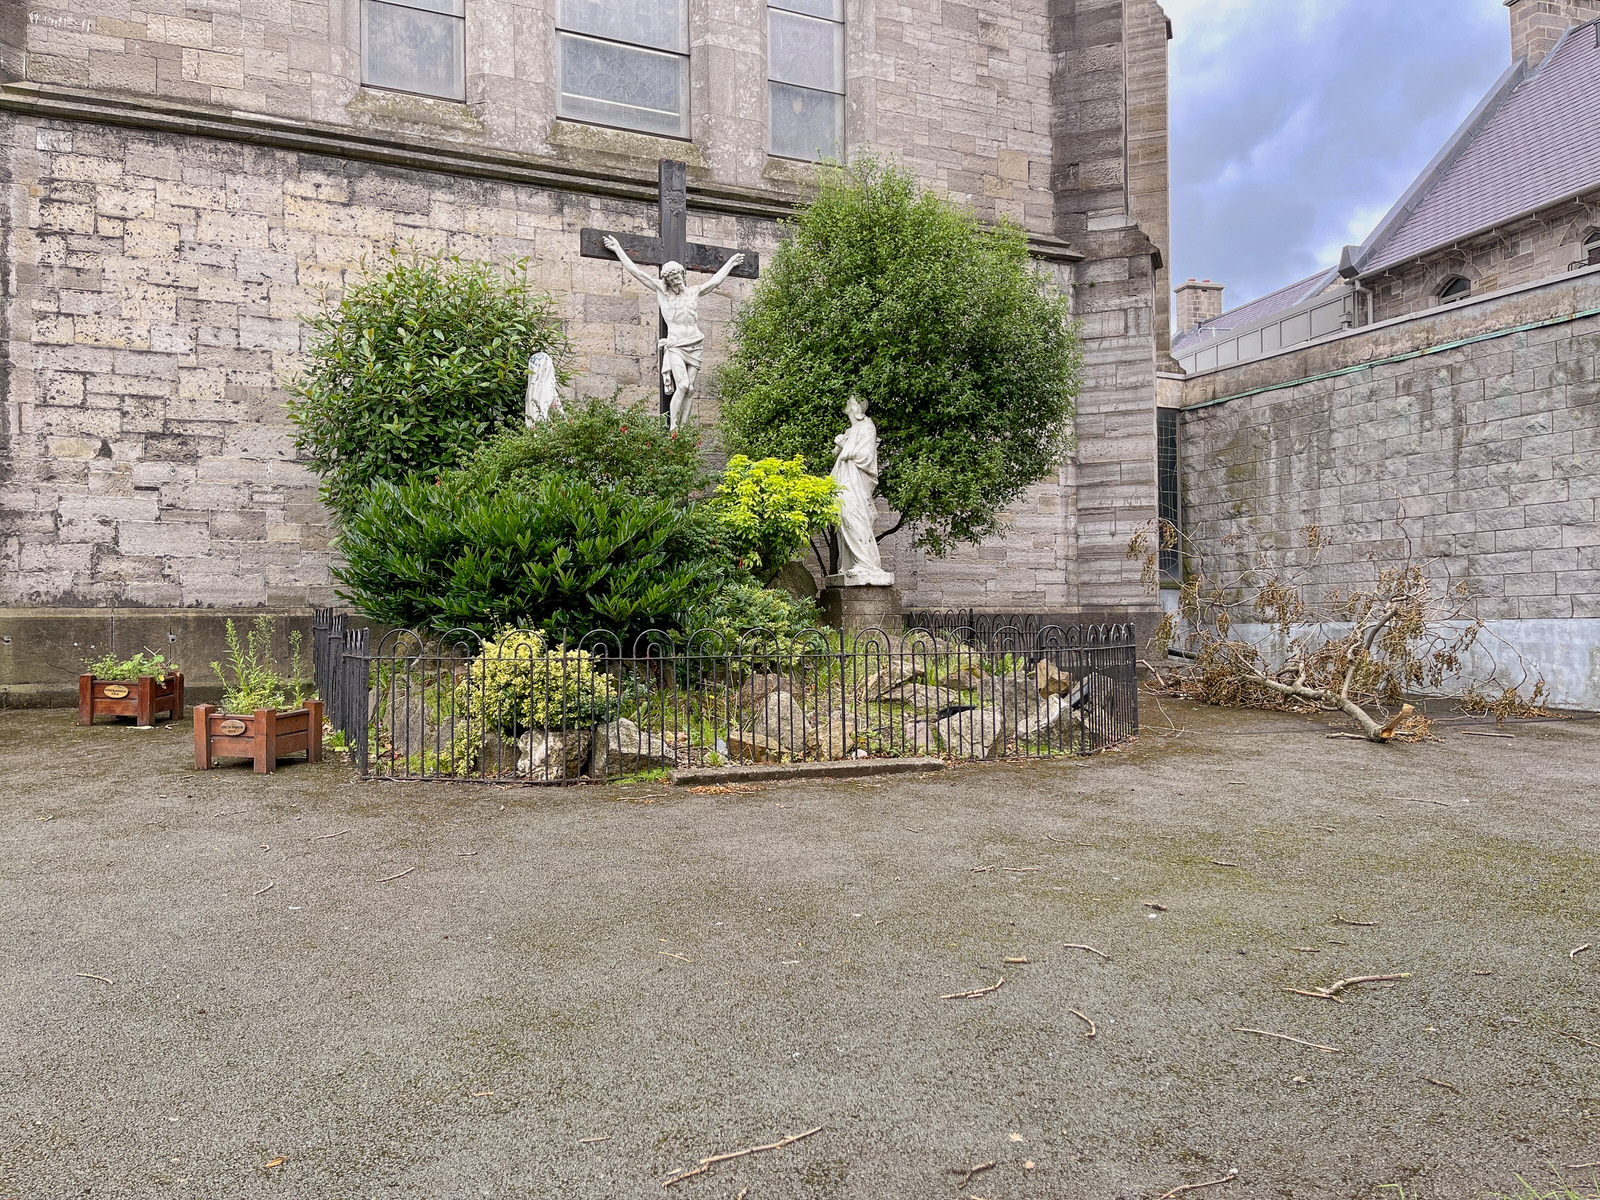 RELIGIOUS STATUES IN THE DOCKLANDS [ST LAURENCE O'TOOLE'S CHURCH]
 003